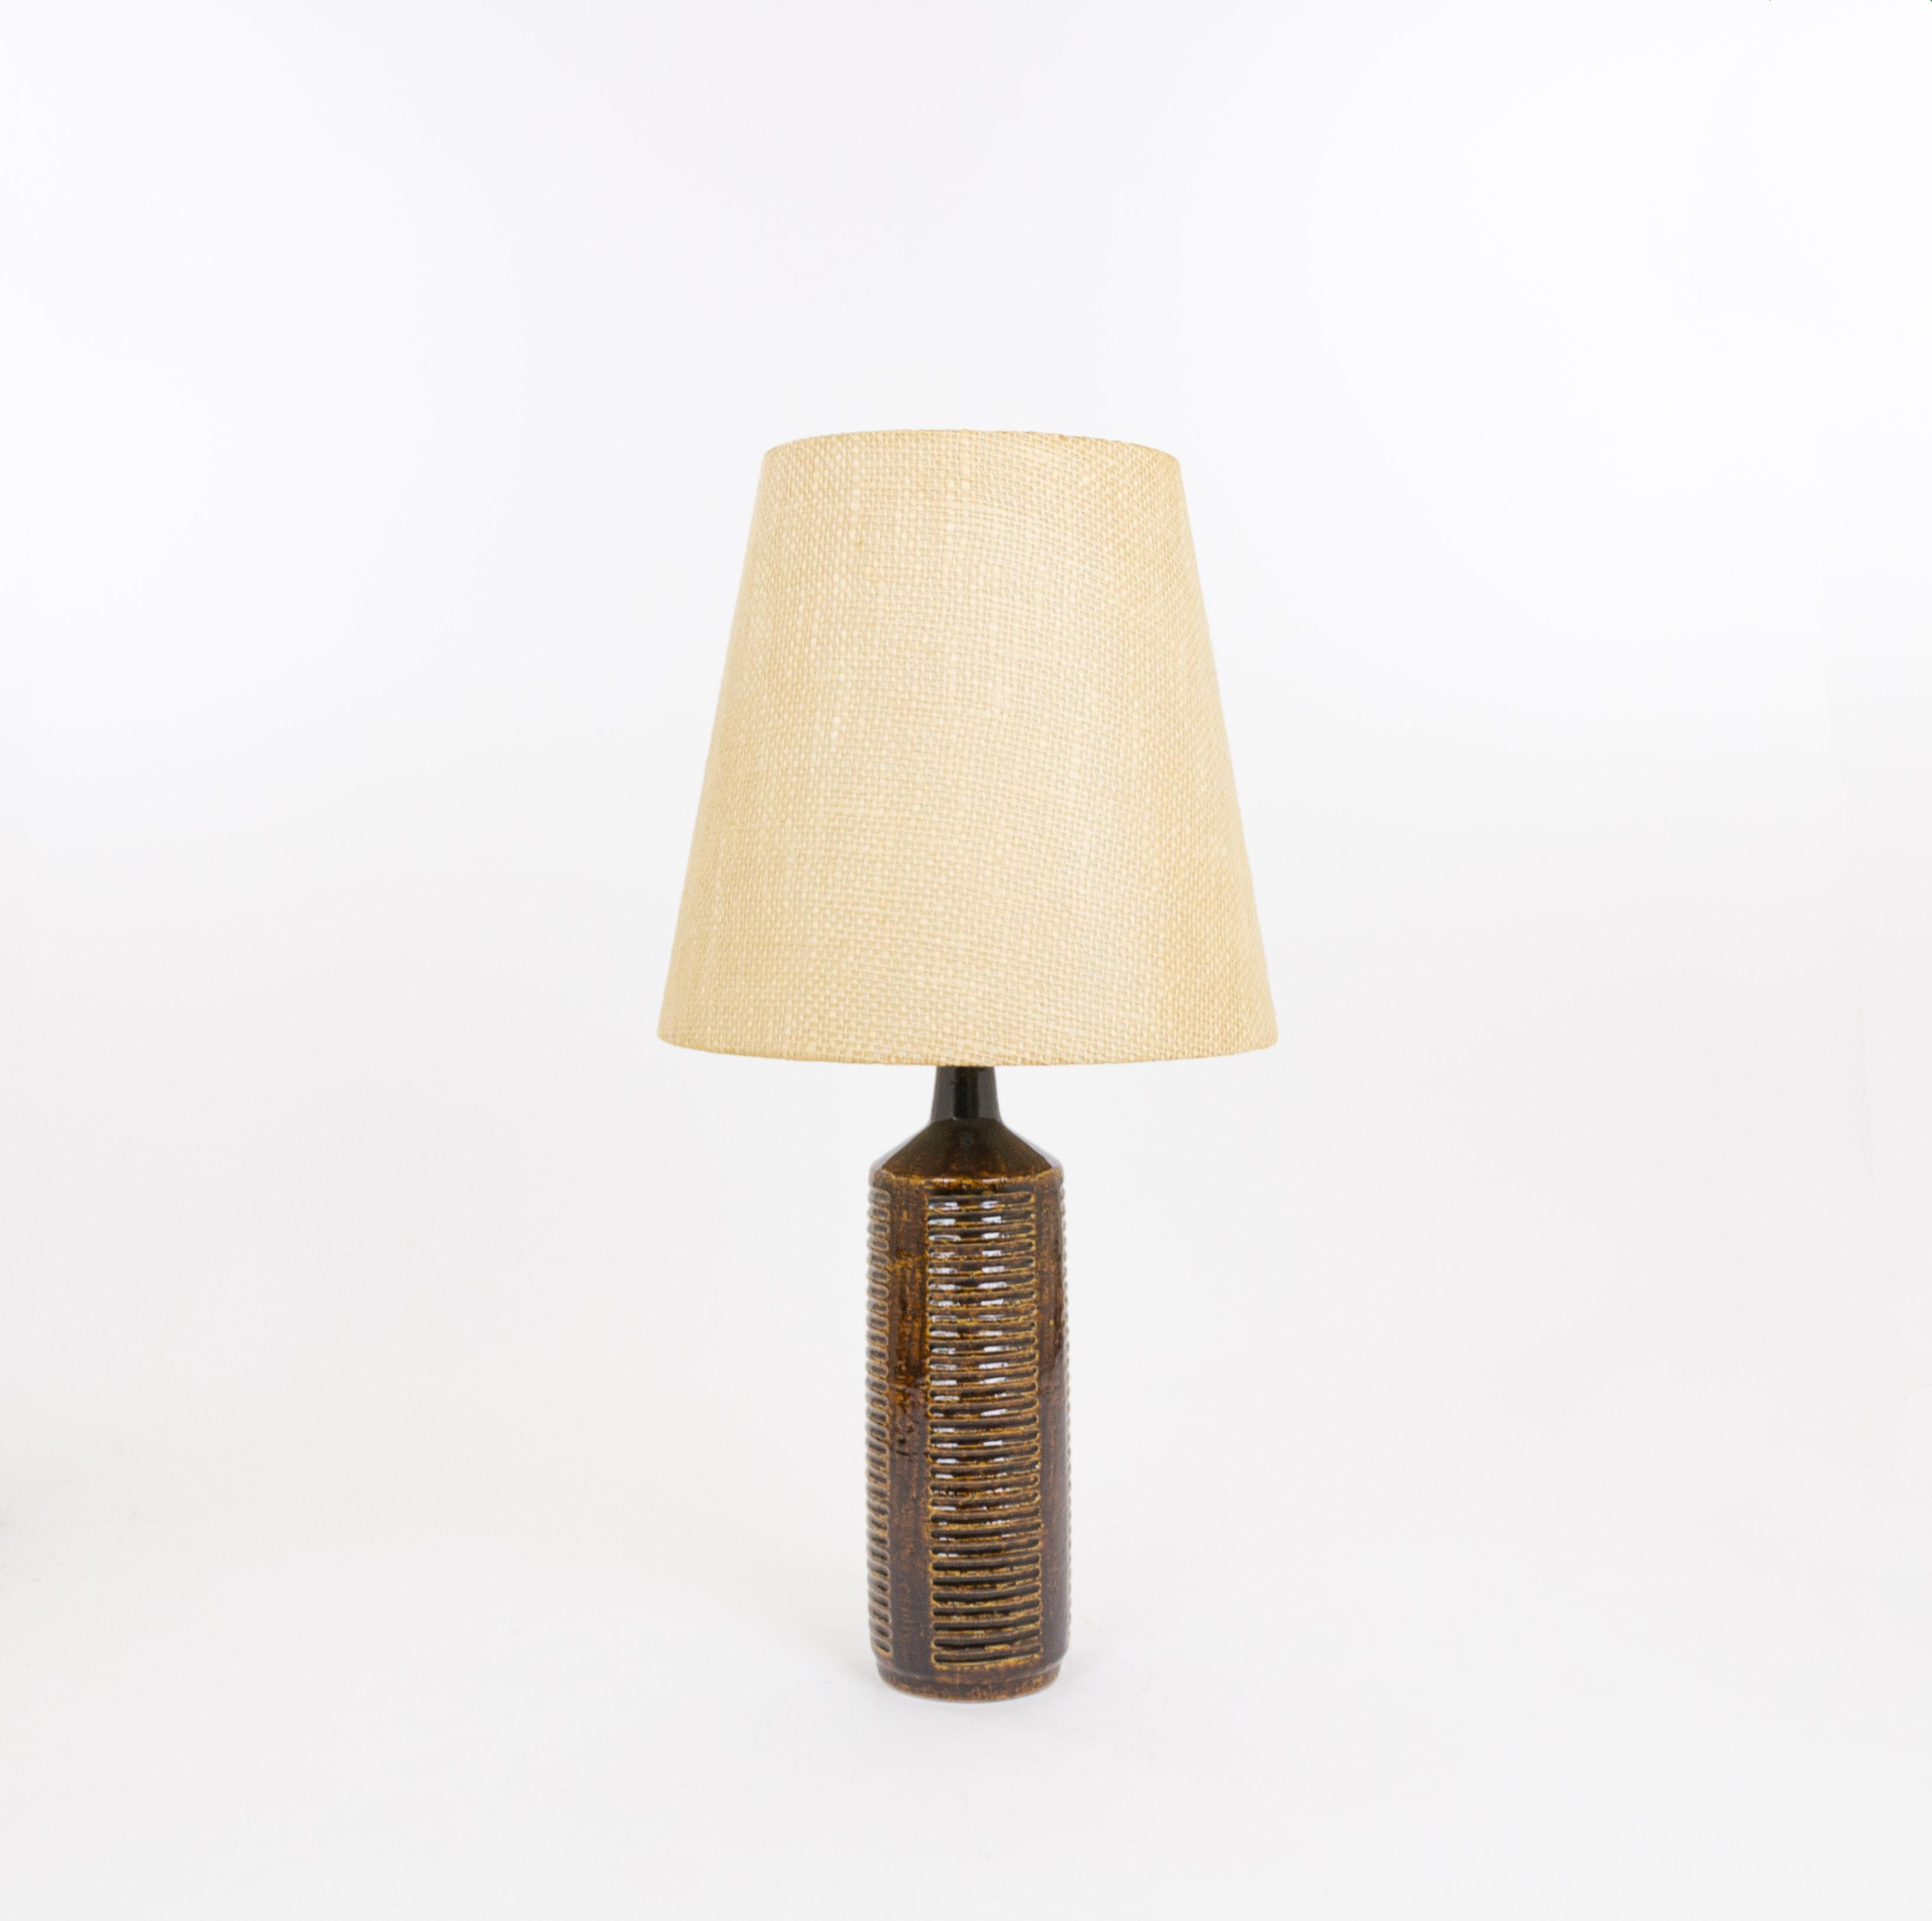 Model DL/27 XL table lamp made by Annelise and Per Linnemann-Schmidt for Palshus in the 1960s. The colour of the handmade decorated base is Dark Chocolate Brown. It has impressed patterns.

The lamp comes with its original lampshade holder. The